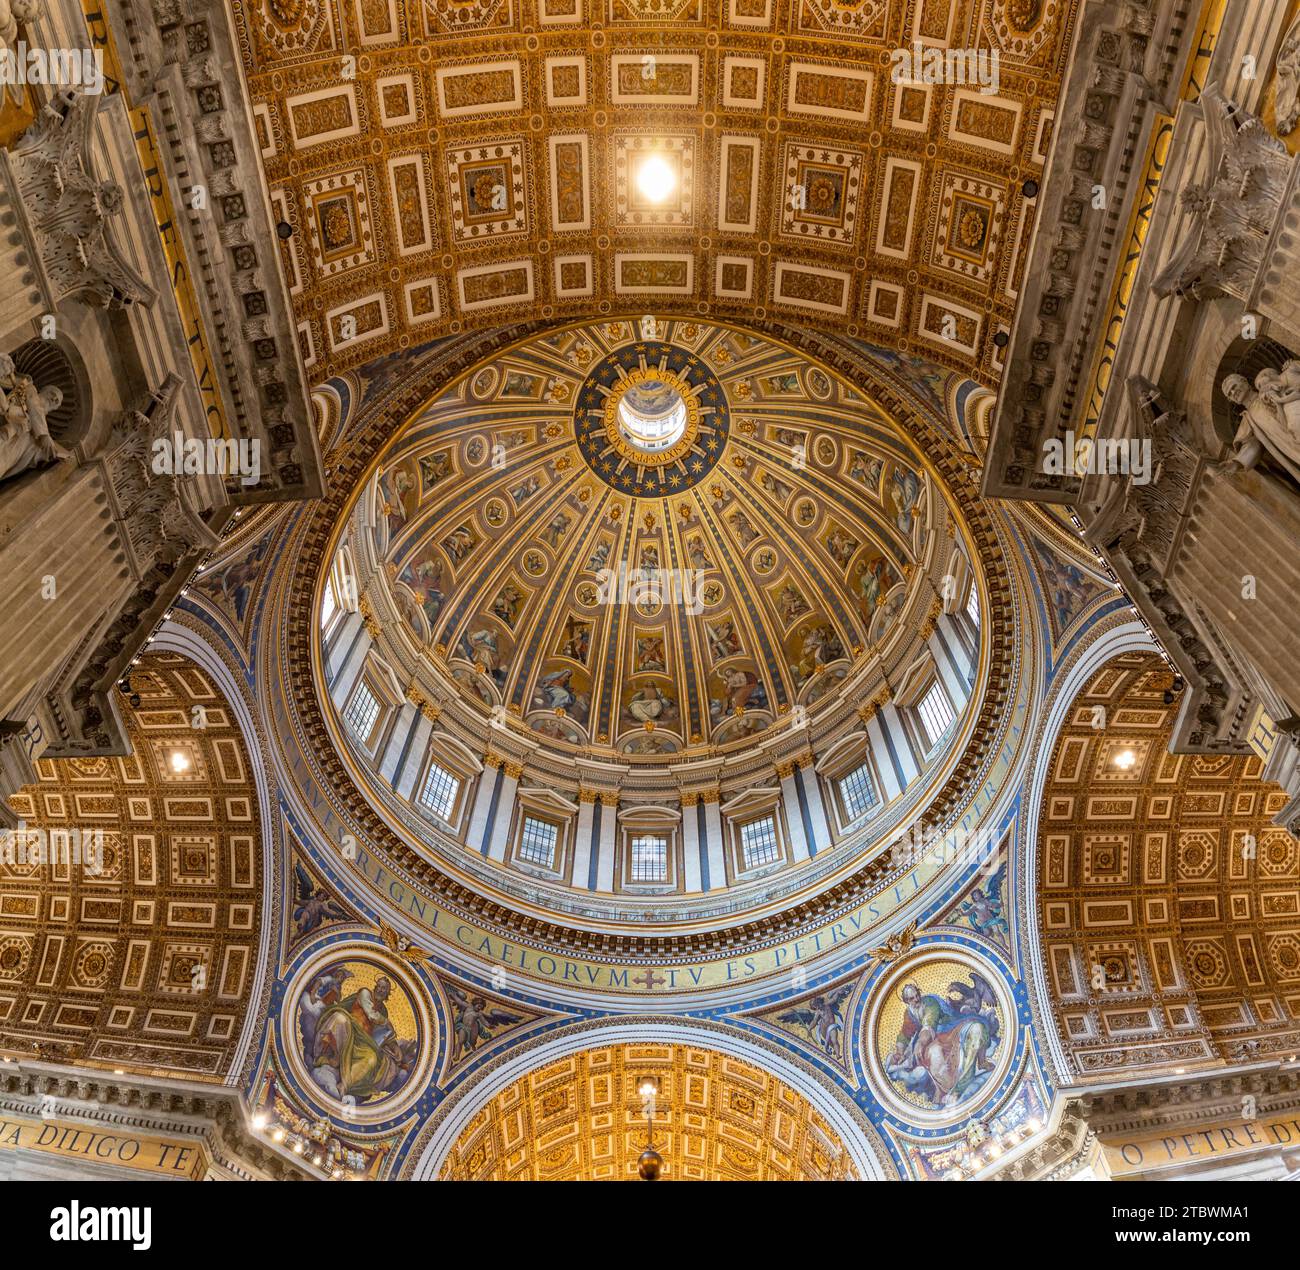 A picture of the huge dome of the St. Peter's Basilica and the surrounding frescoes and architecture as seen from the inside Stock Photo